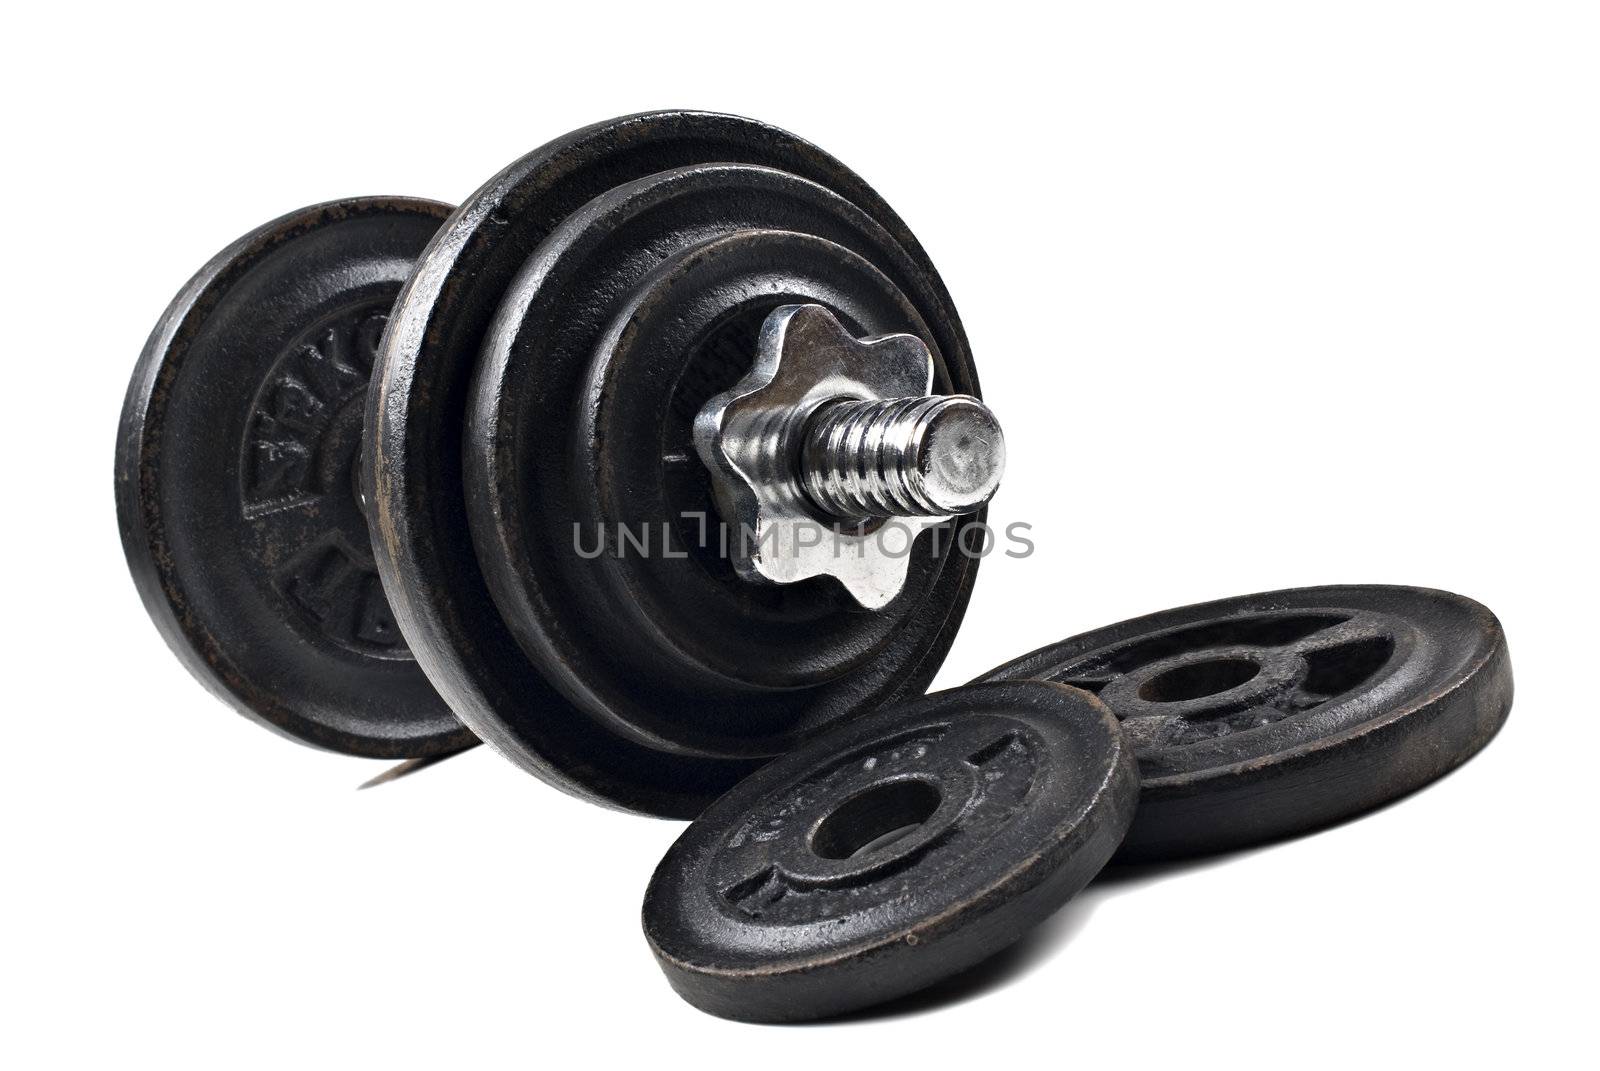 Black dumbbells and loose weights on a white background with space for text by tish1